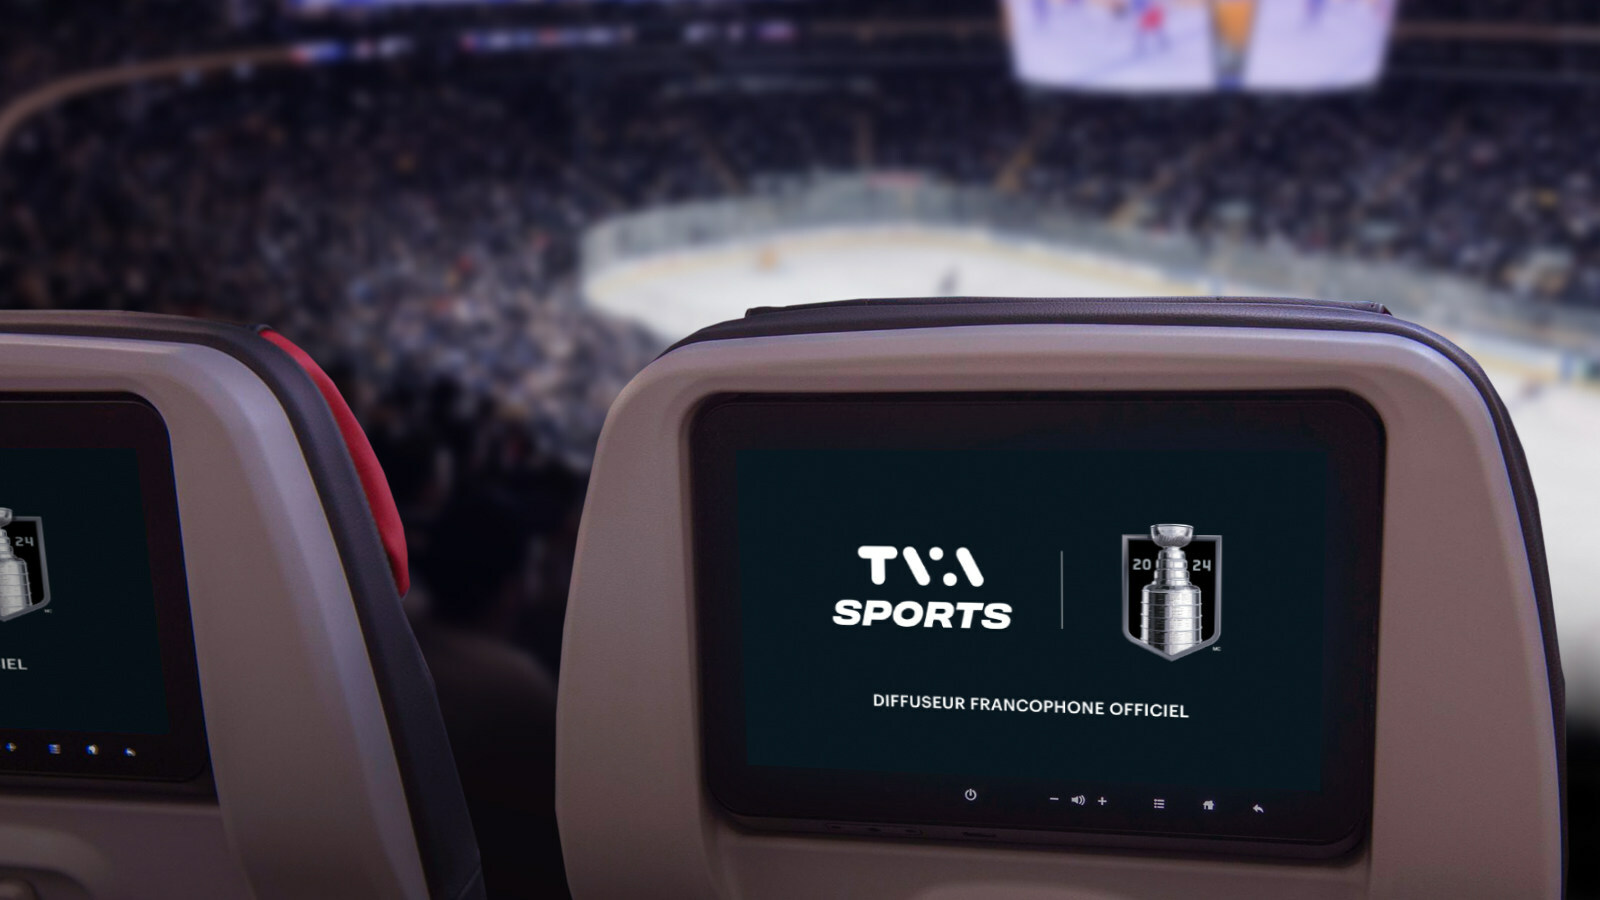 Air Canada expands its live TV offering with TVA Sports